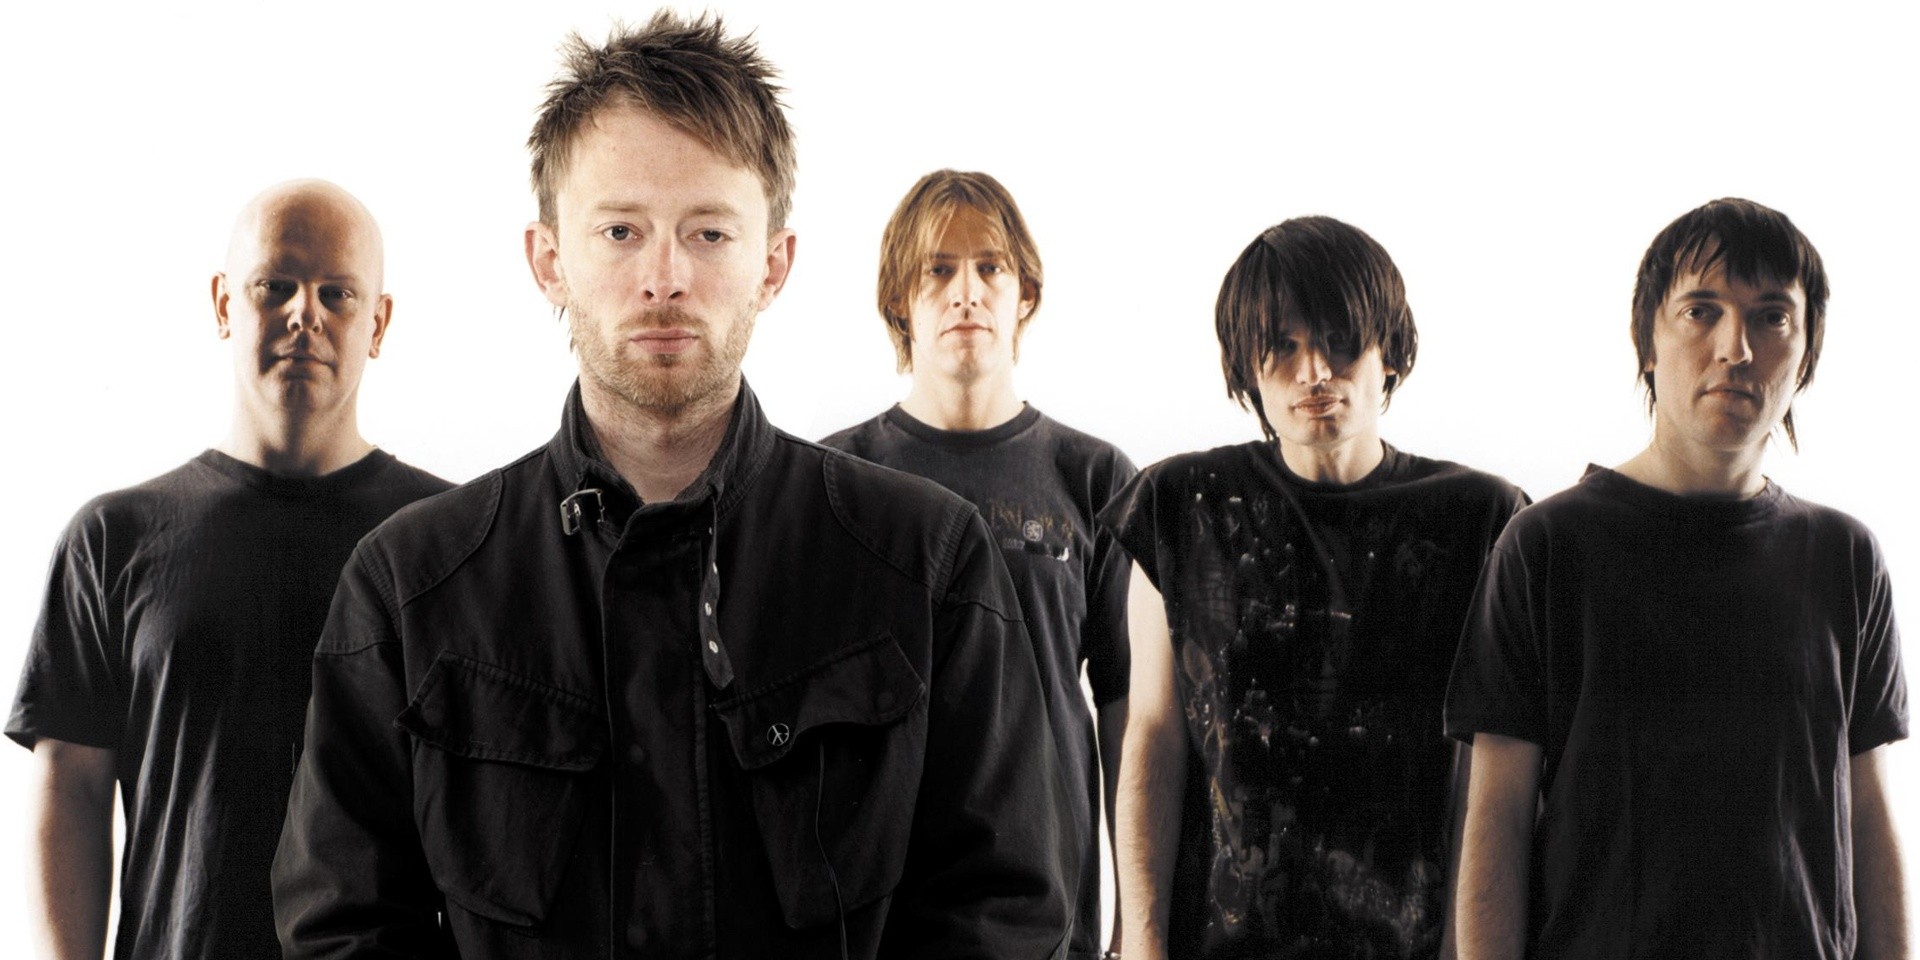 Radiohead is coming to Asia